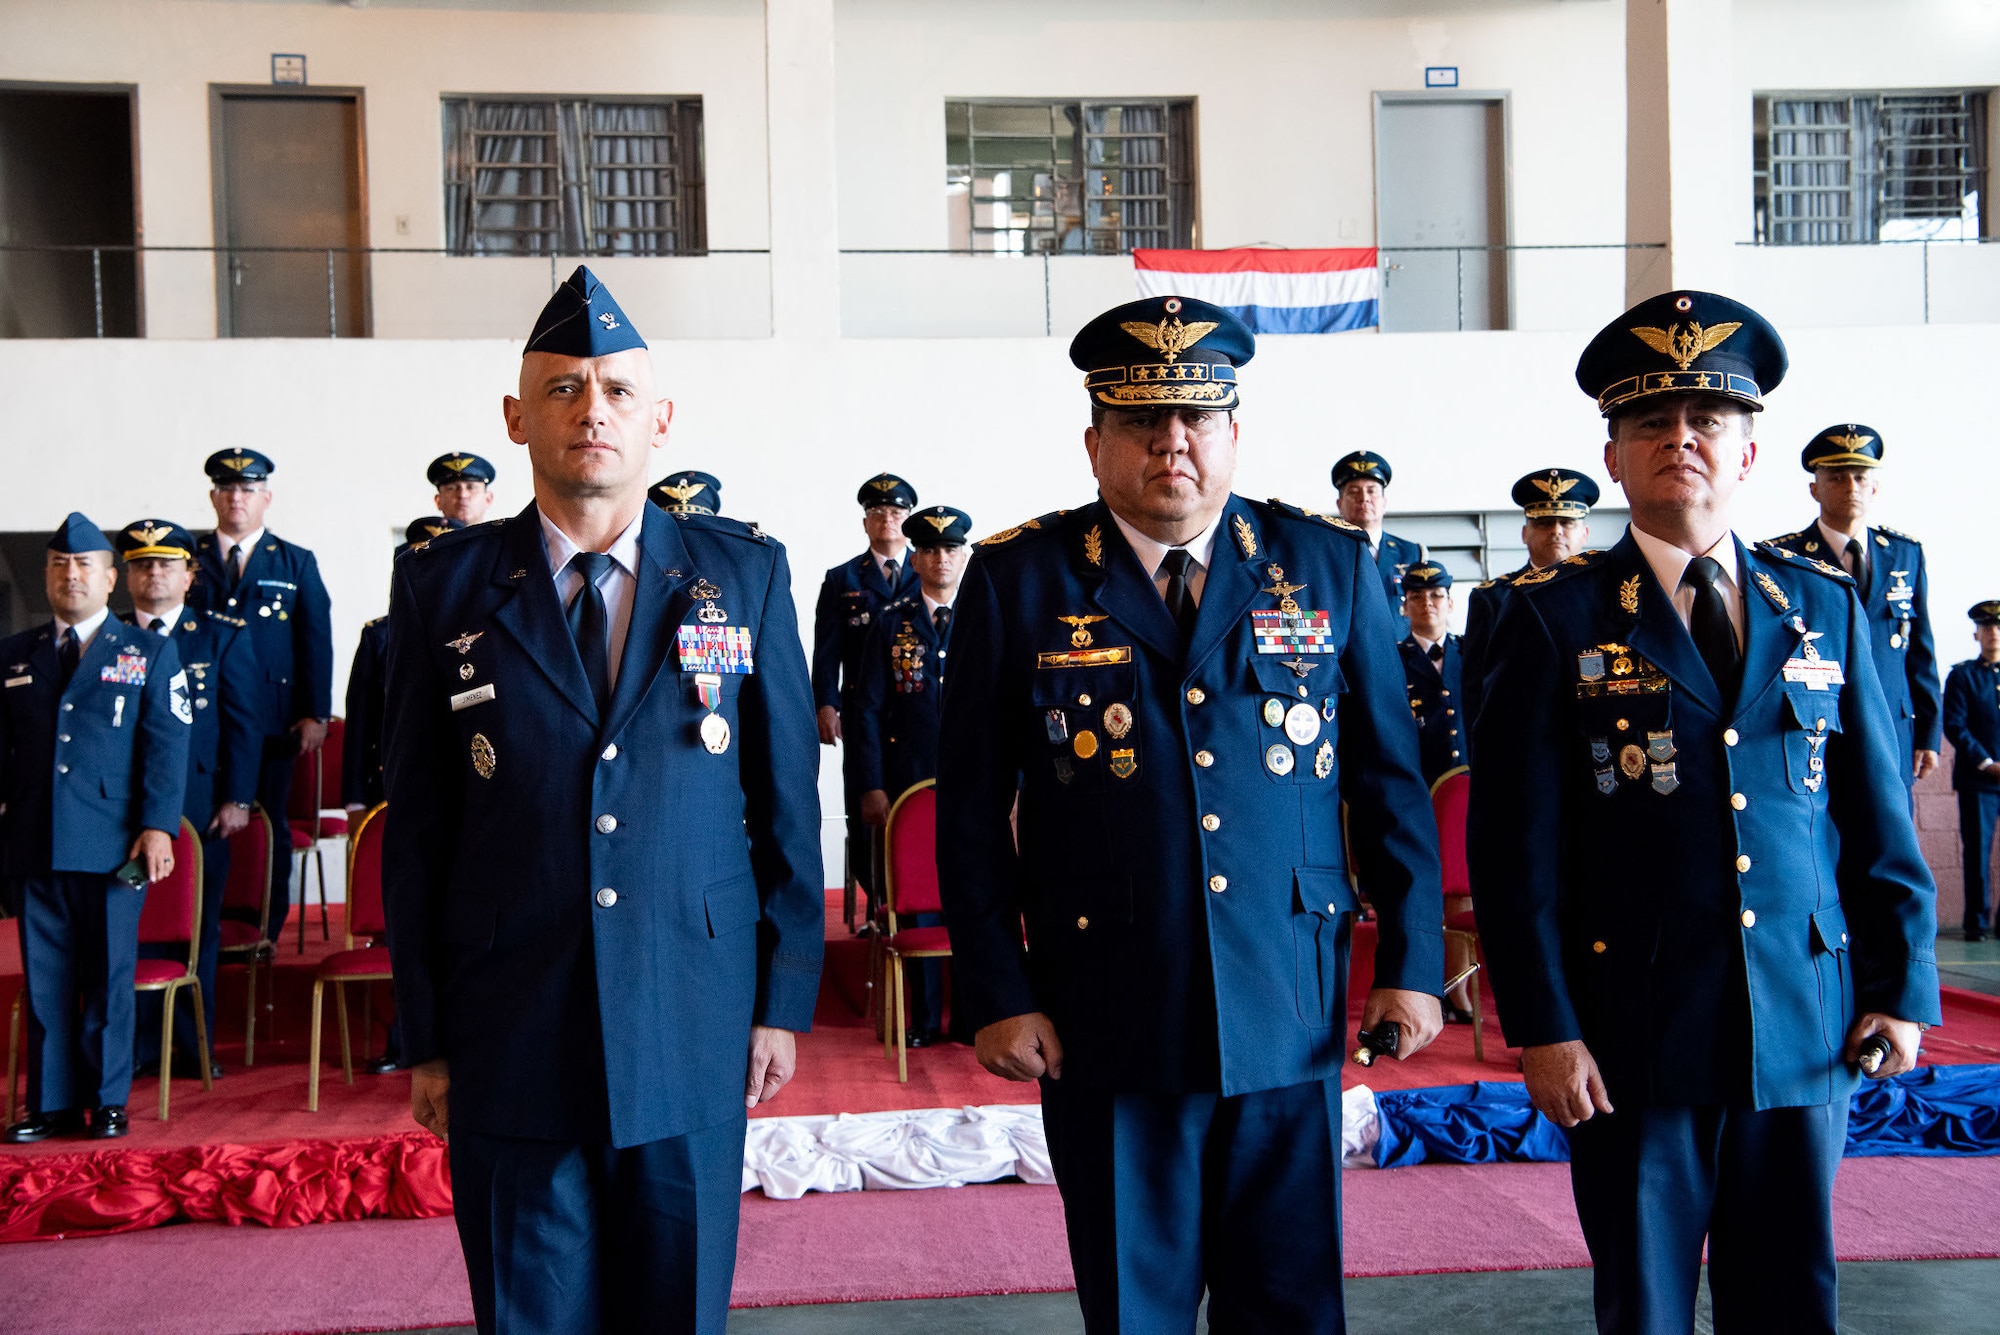 Three men stand side-by-side, all standing at attention. A group of military members are standing behind them.